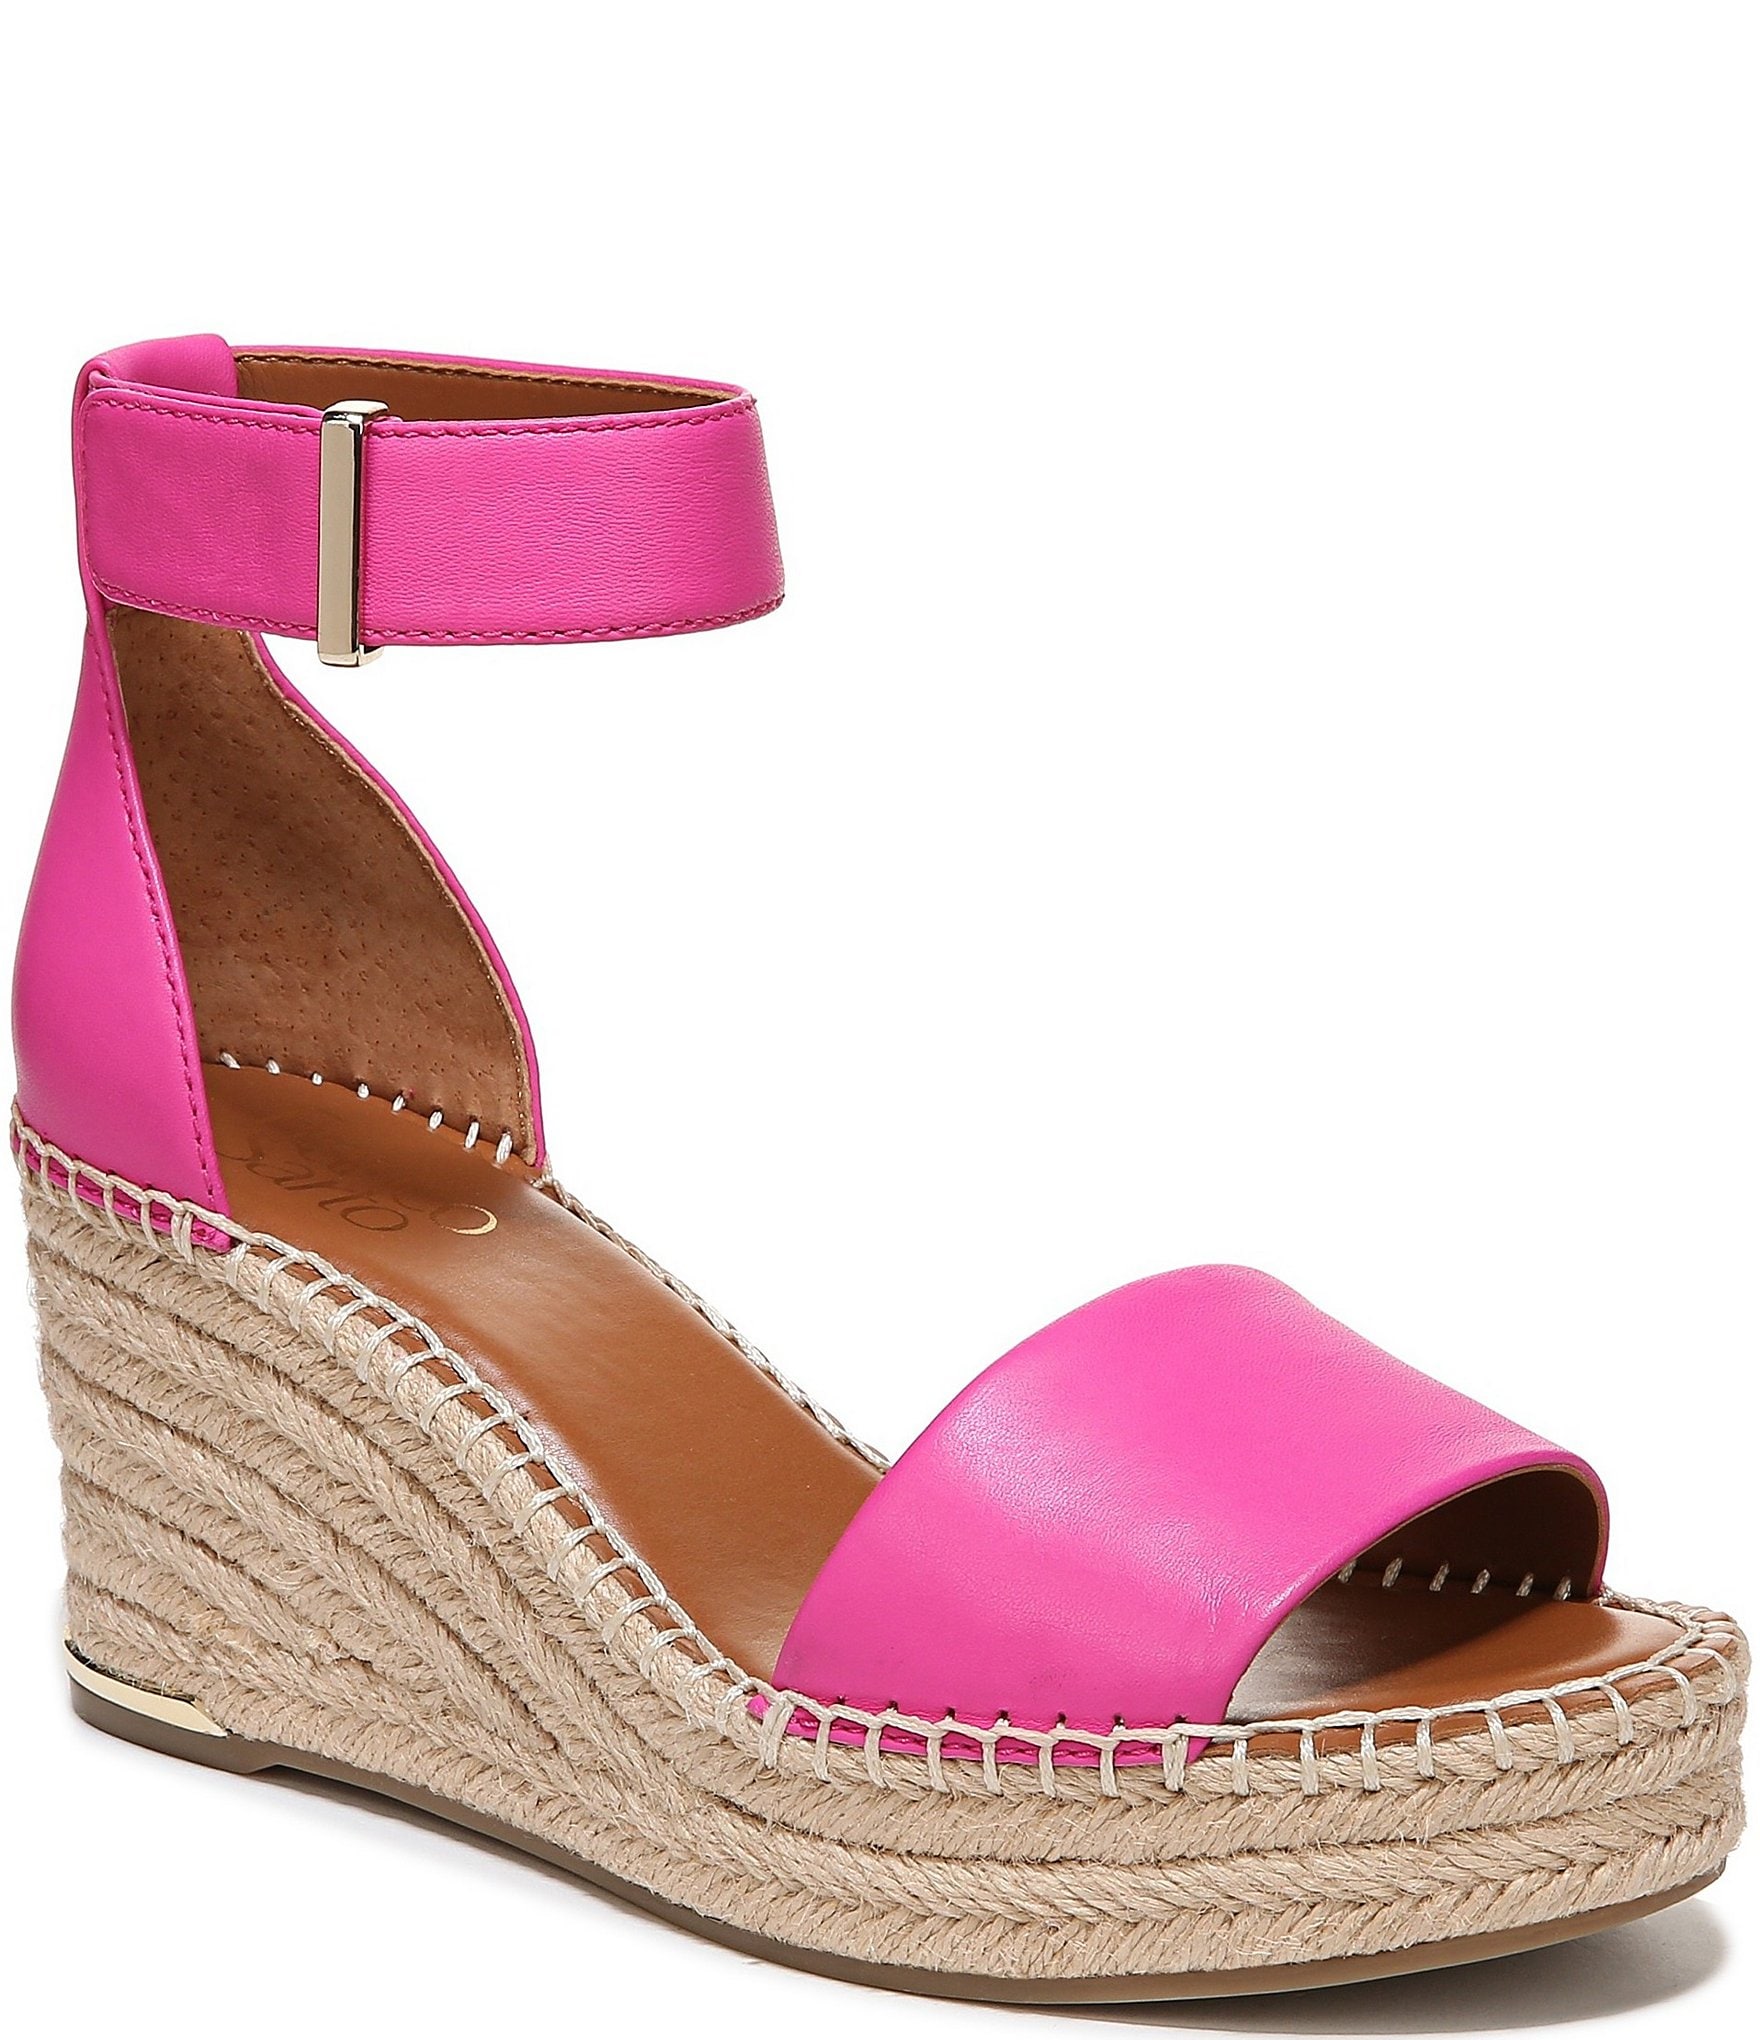 pink shoes: Women's Wedge Sandals